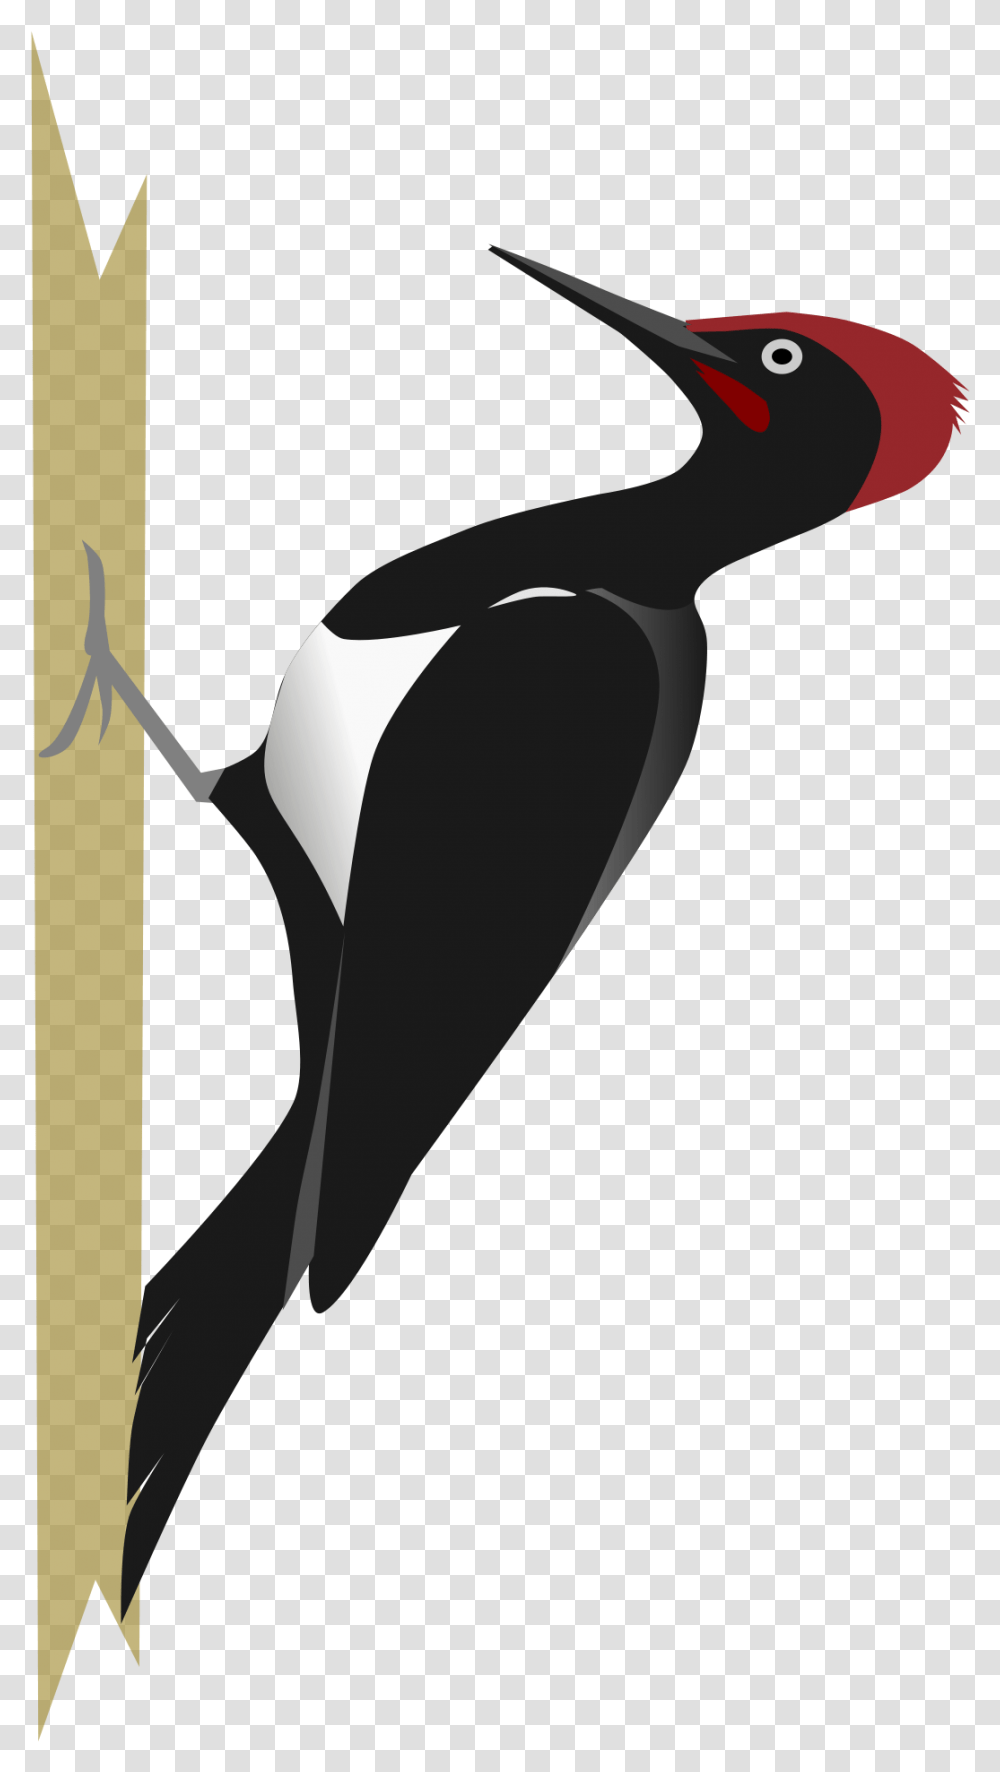 Woodpecker Images Free Download Woodpecker, Bird, Animal, Art, Graphics Transparent Png